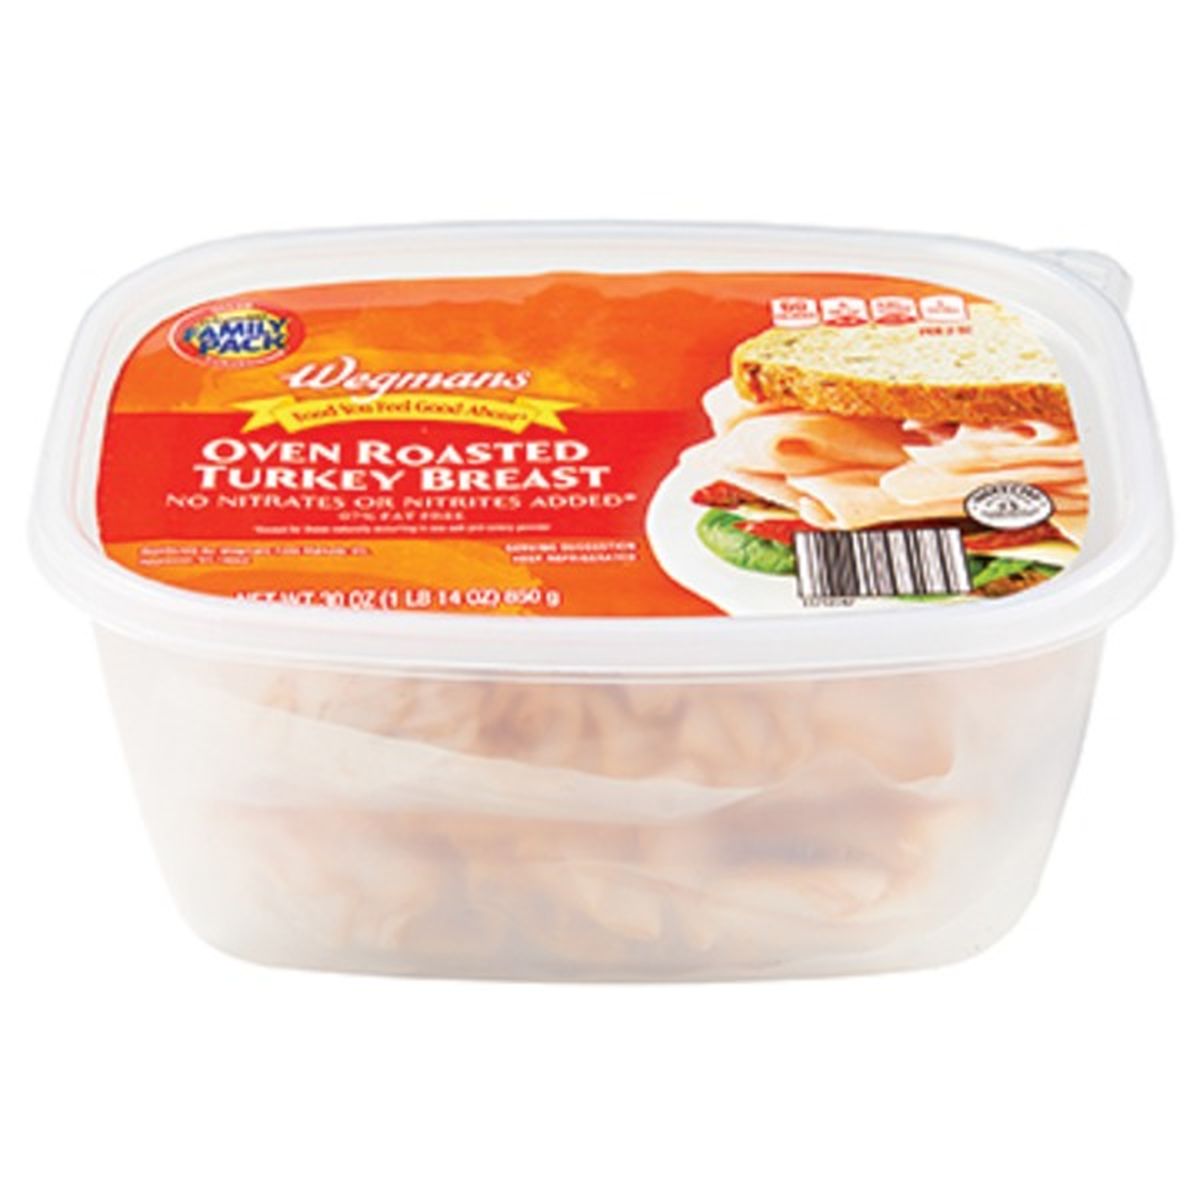 Calories in Wegmans Oven Roasted Turkey Breast, FAMILY PACK